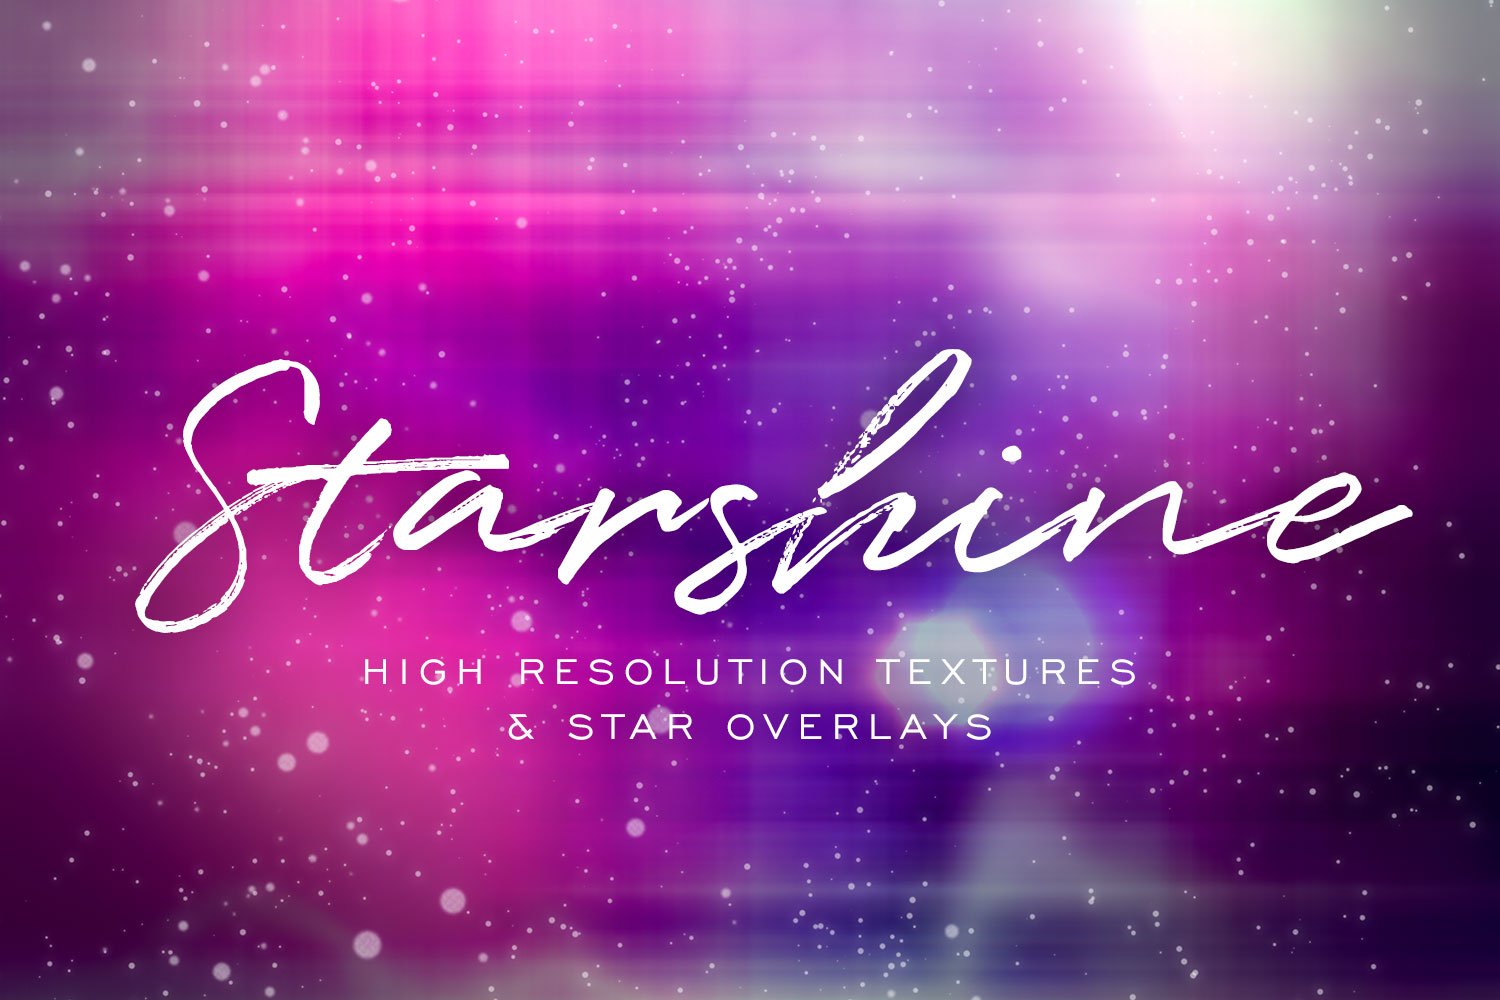 Starshine Galaxy Textures & Overlays cover image.